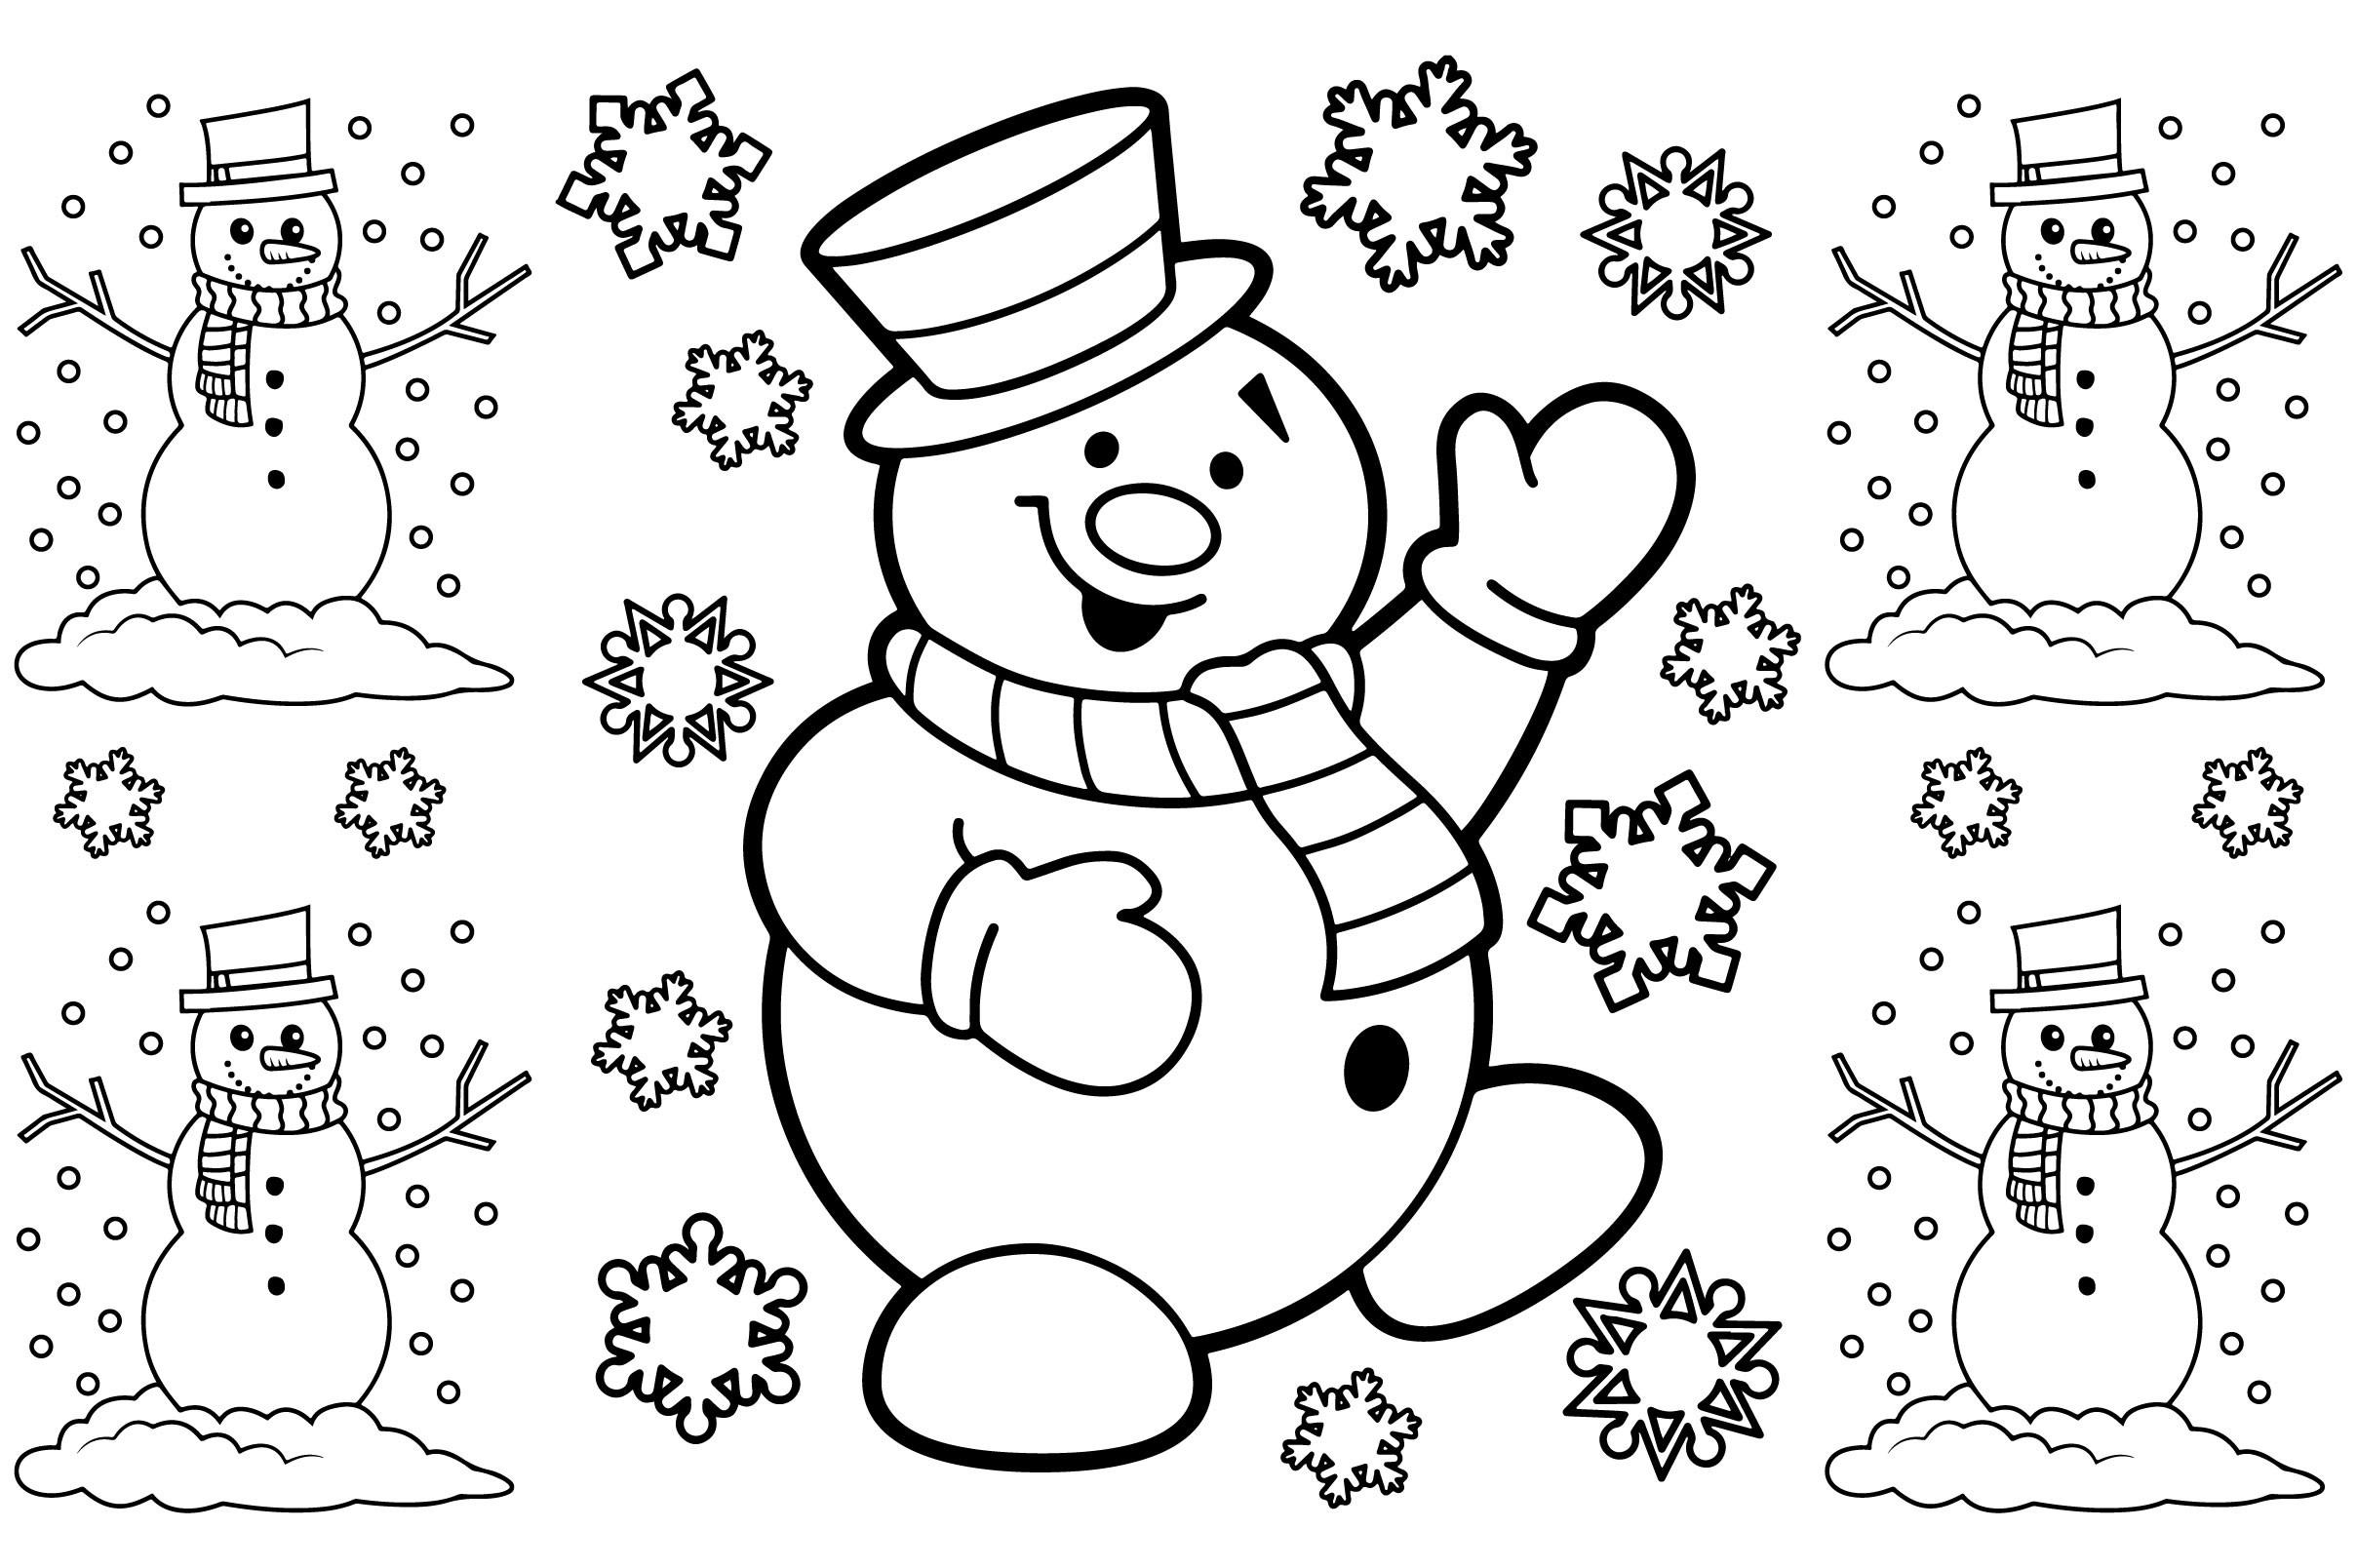 Coloring Page Design